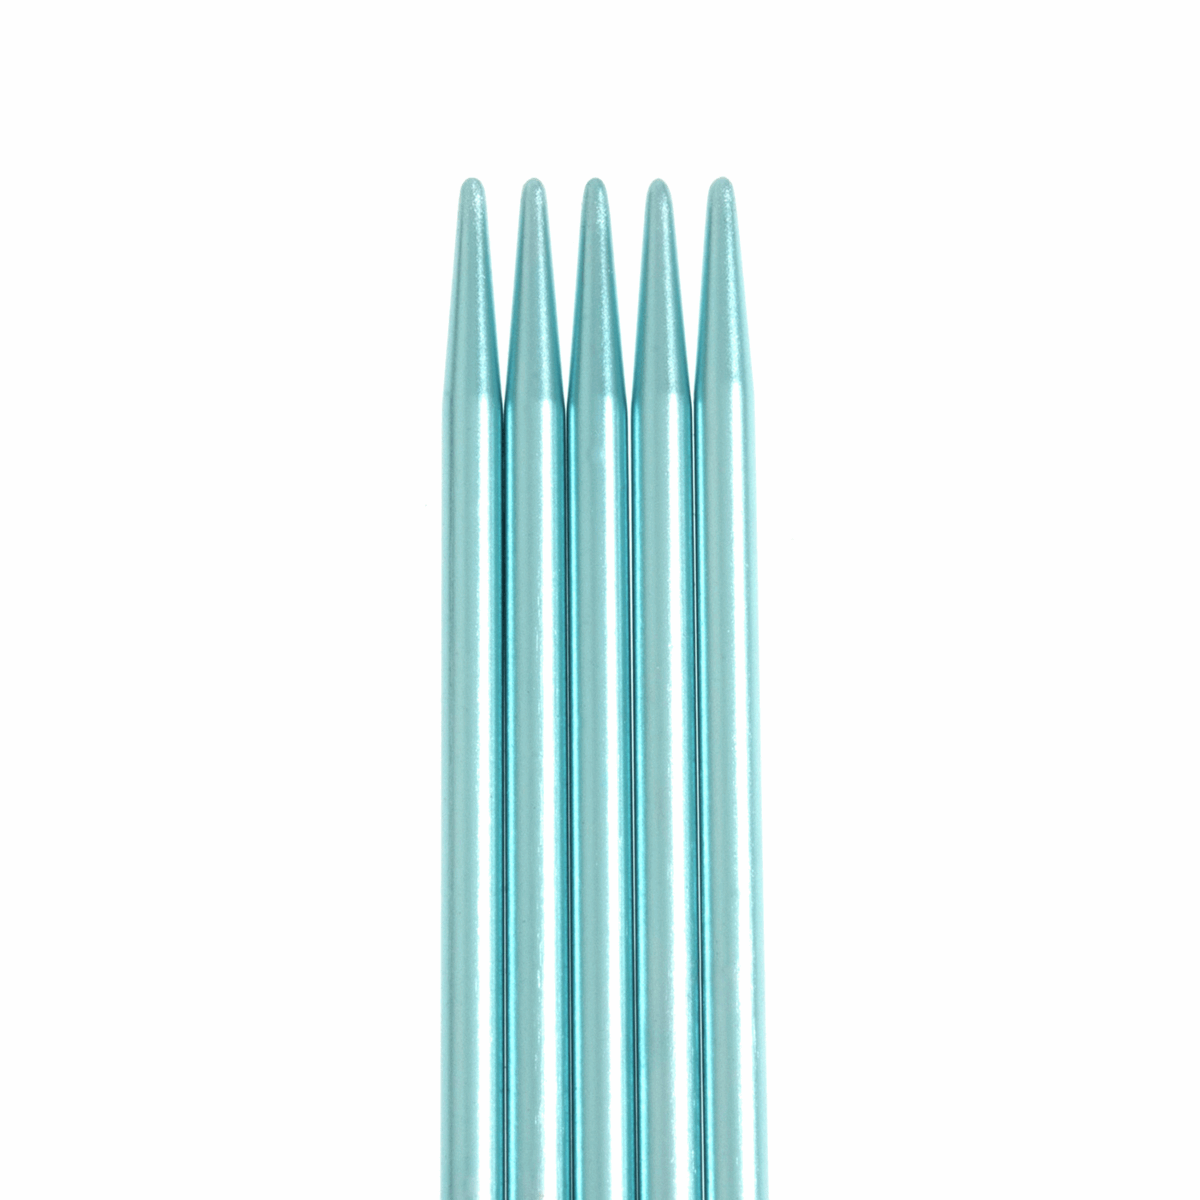 PONY Double-Ended Coloured Aluminium Knitting Pins - 20cm x 2.75mm (Set of 5)